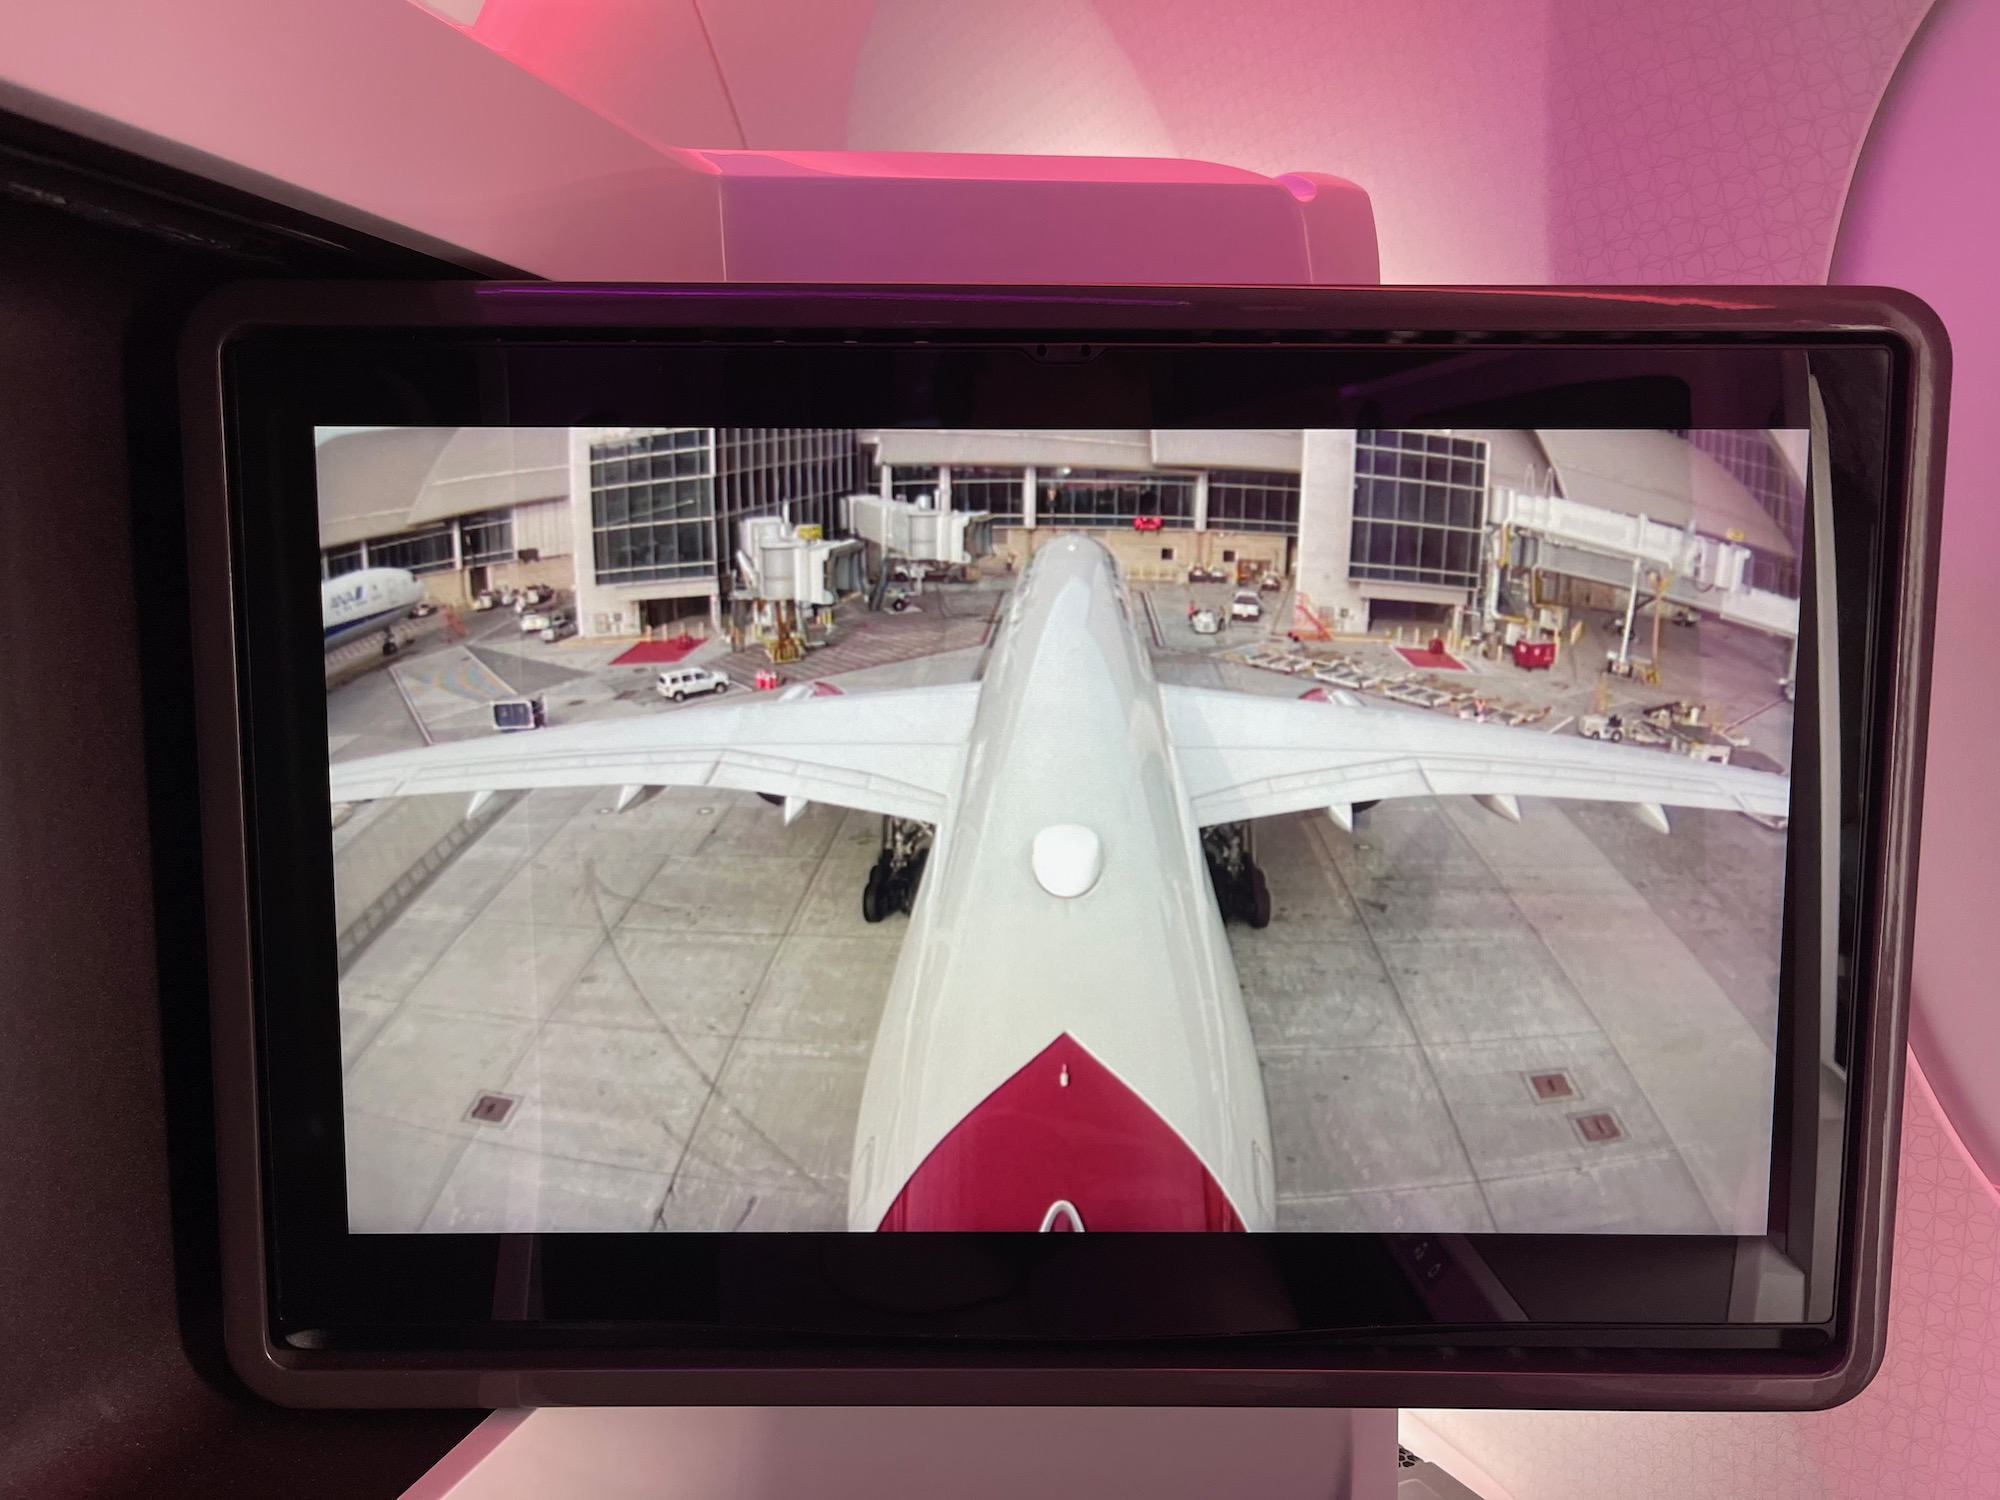 a screen with a plane on it